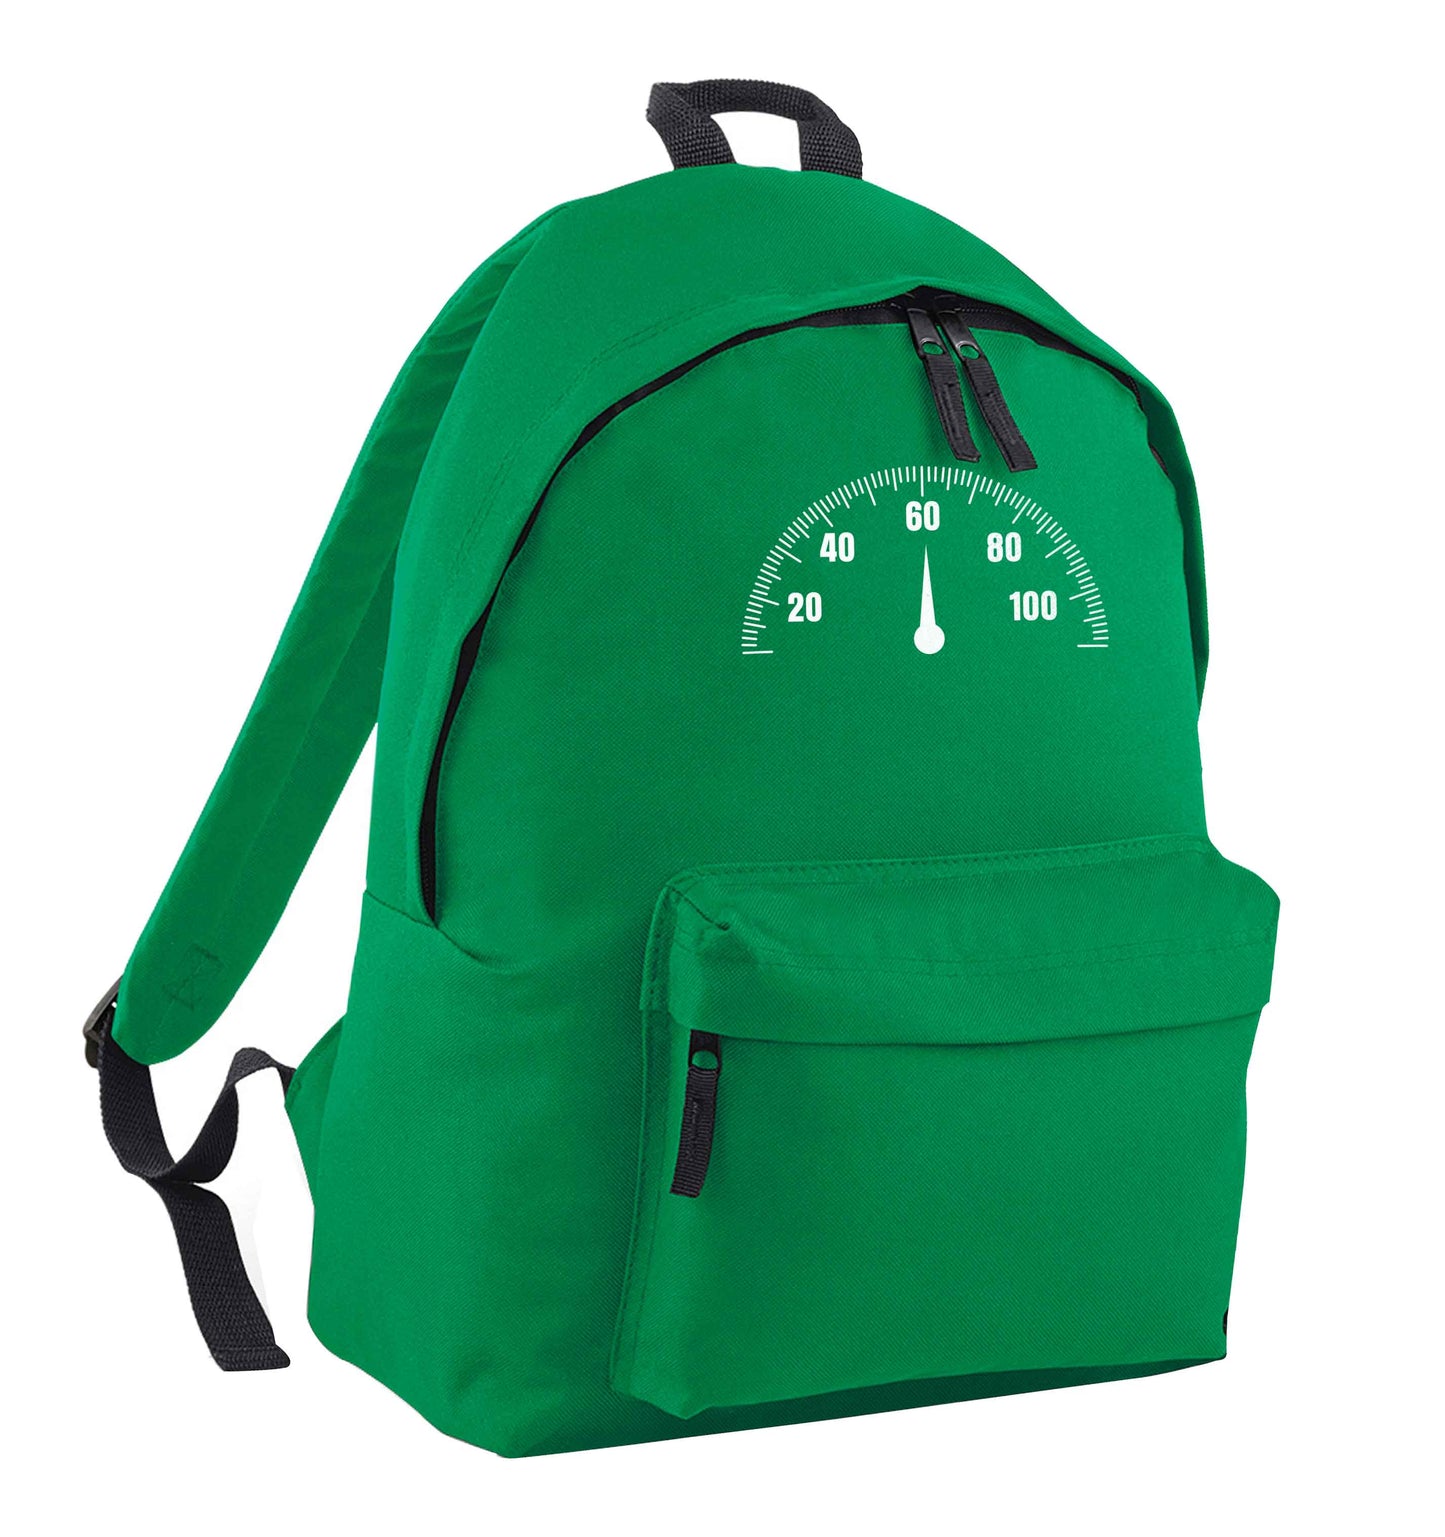 Speed dial 60 green adults backpack